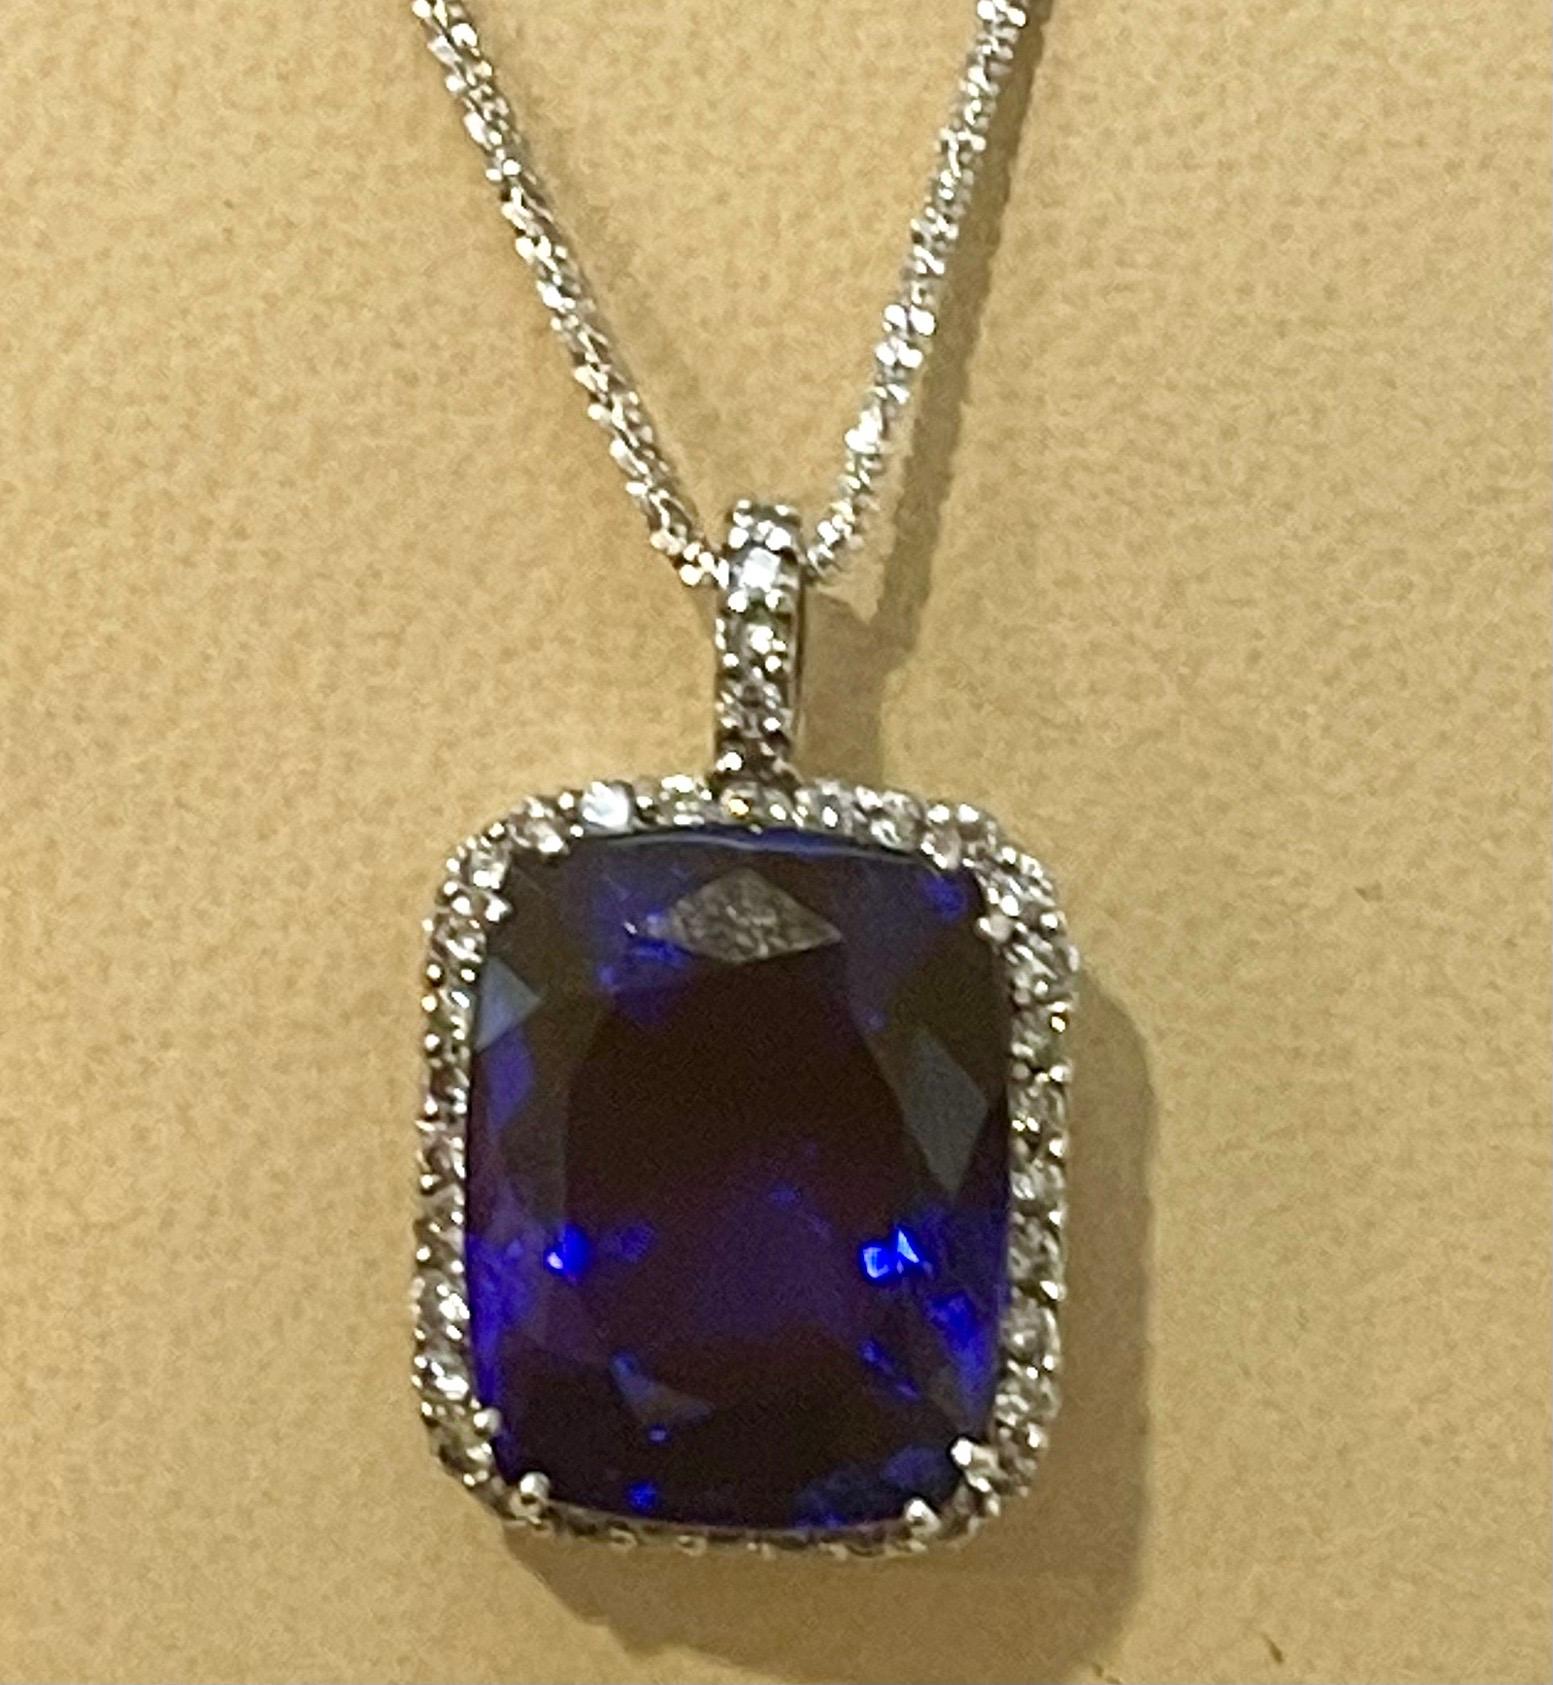 37.5 Carat Tanzanite Necklace & Diamond Pendant with Chain 14 Karat White Gold In Excellent Condition For Sale In New York, NY